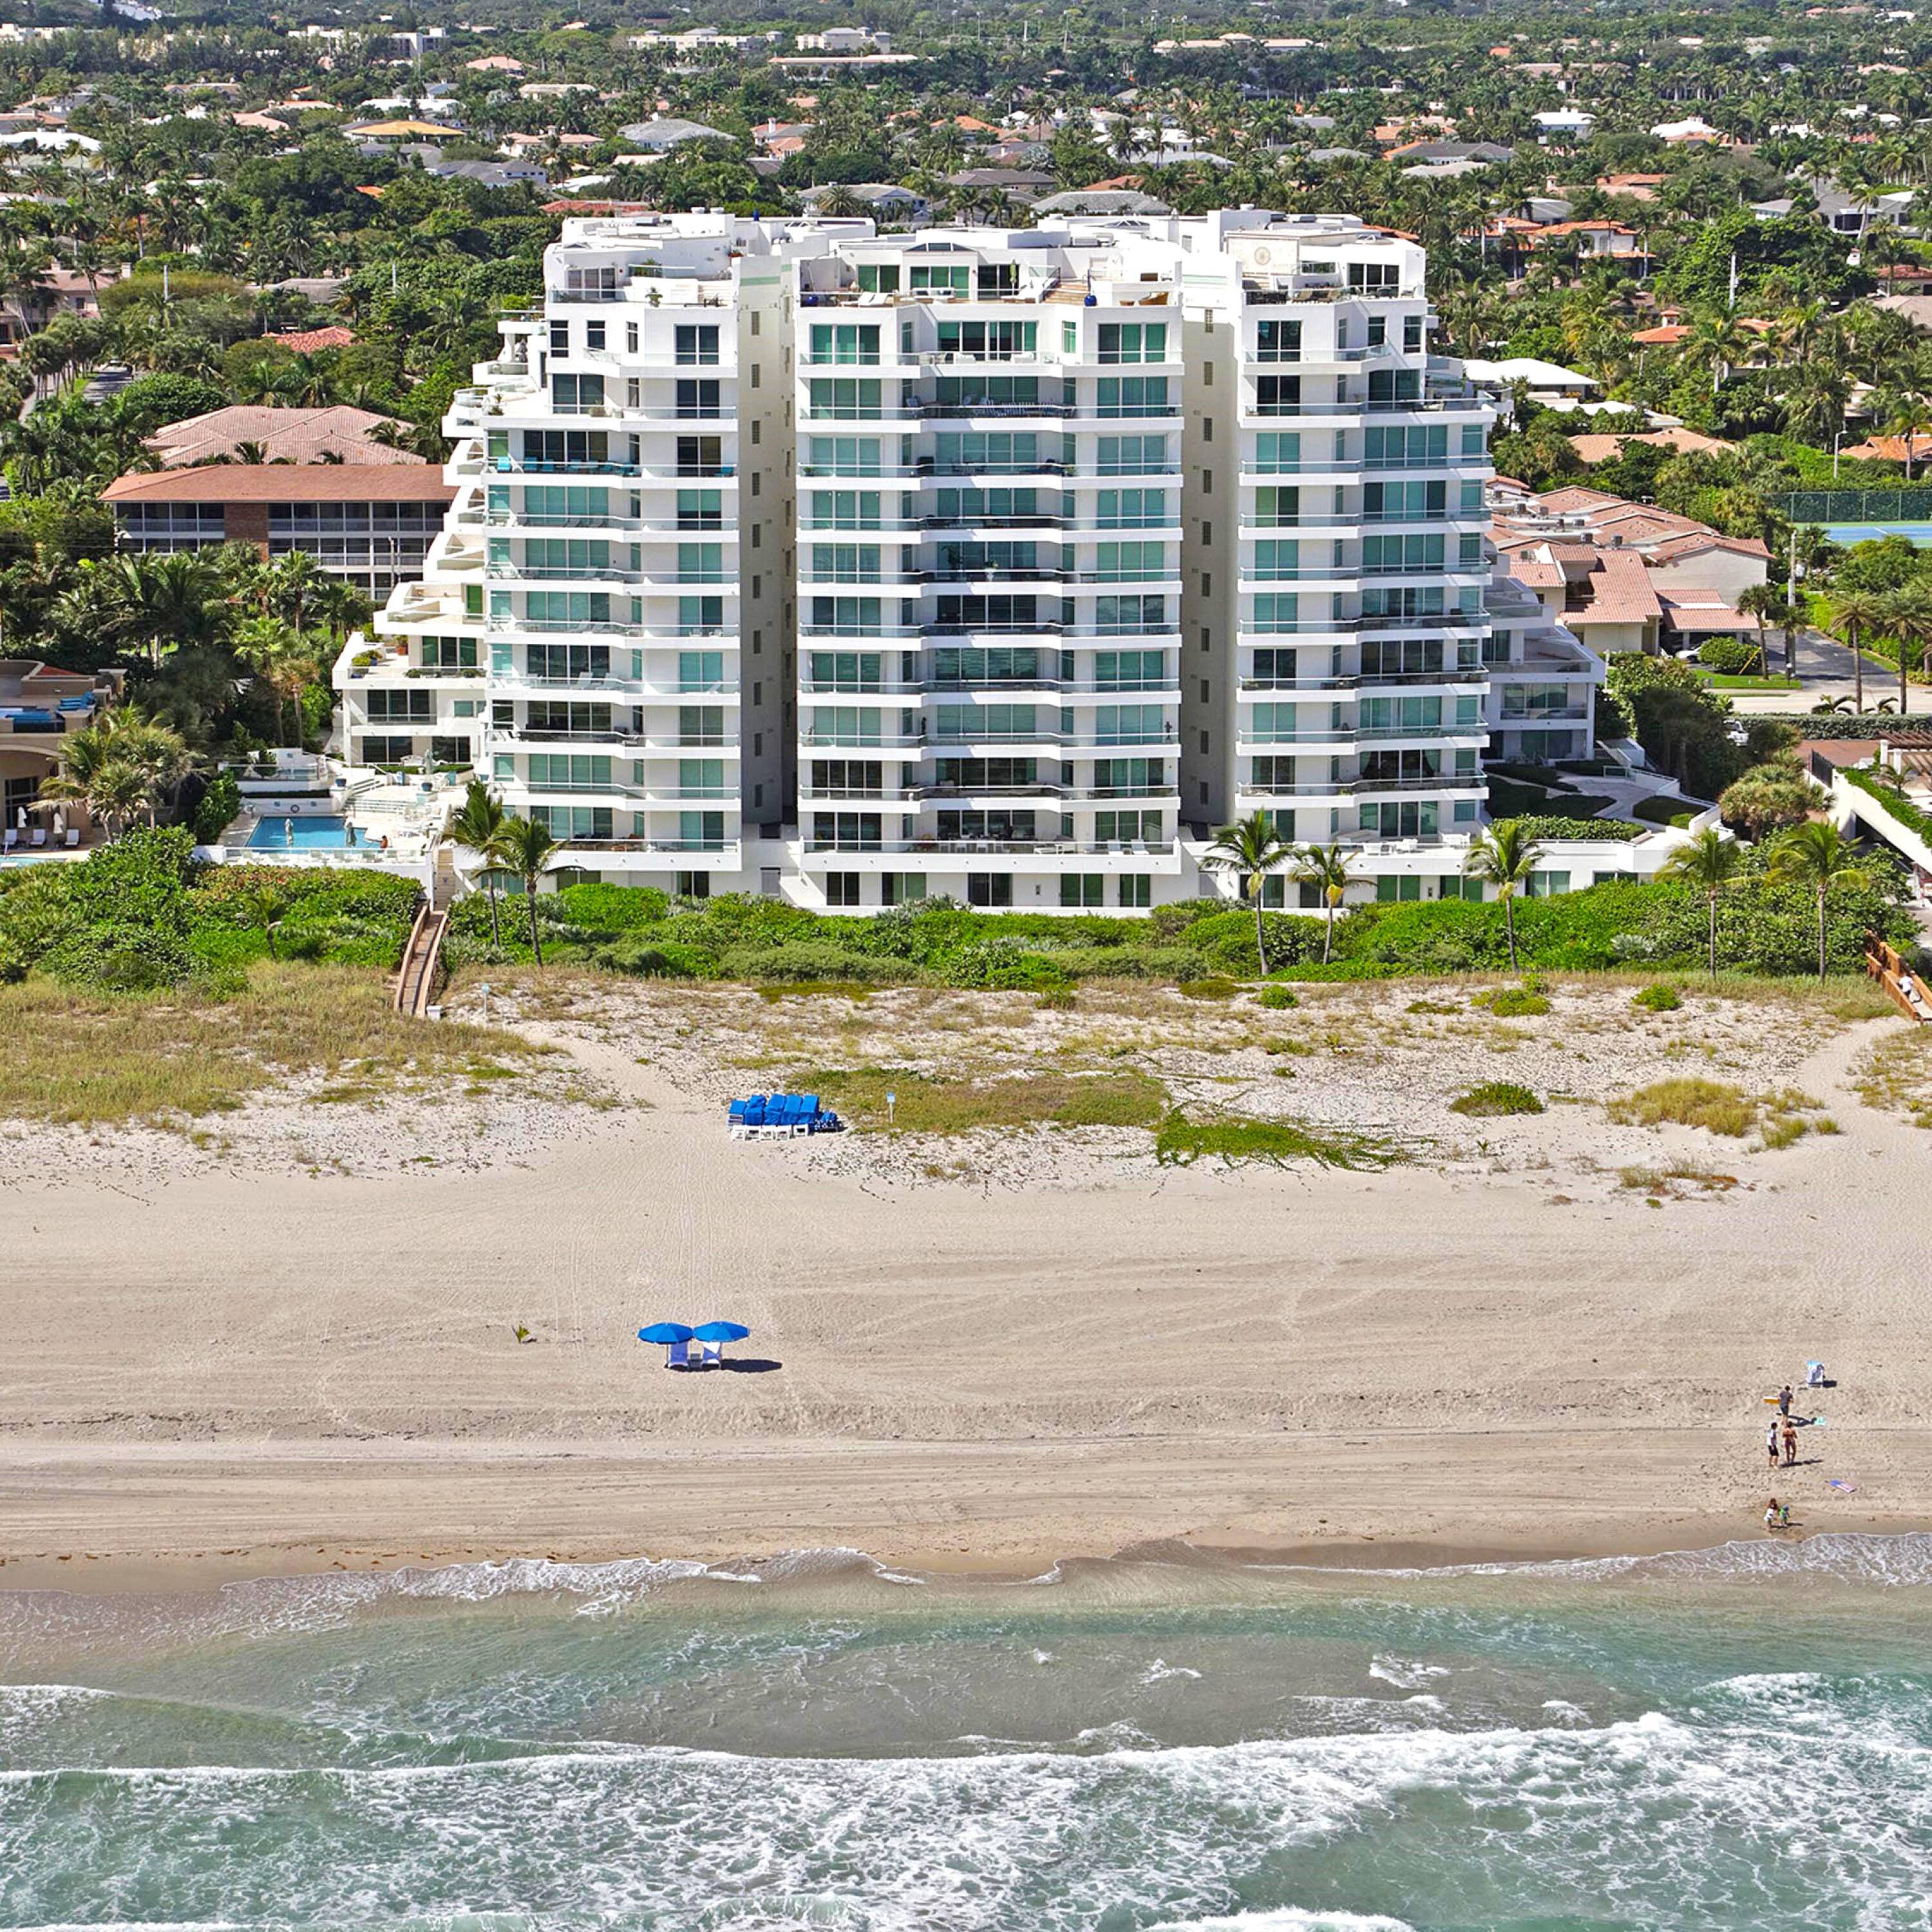 Magnificent Southeast Corner Oceanfront Residence with a Wrap Around Terrace is now available at the prestigious Aragon sited Directly on the Sand in Boca Raton.